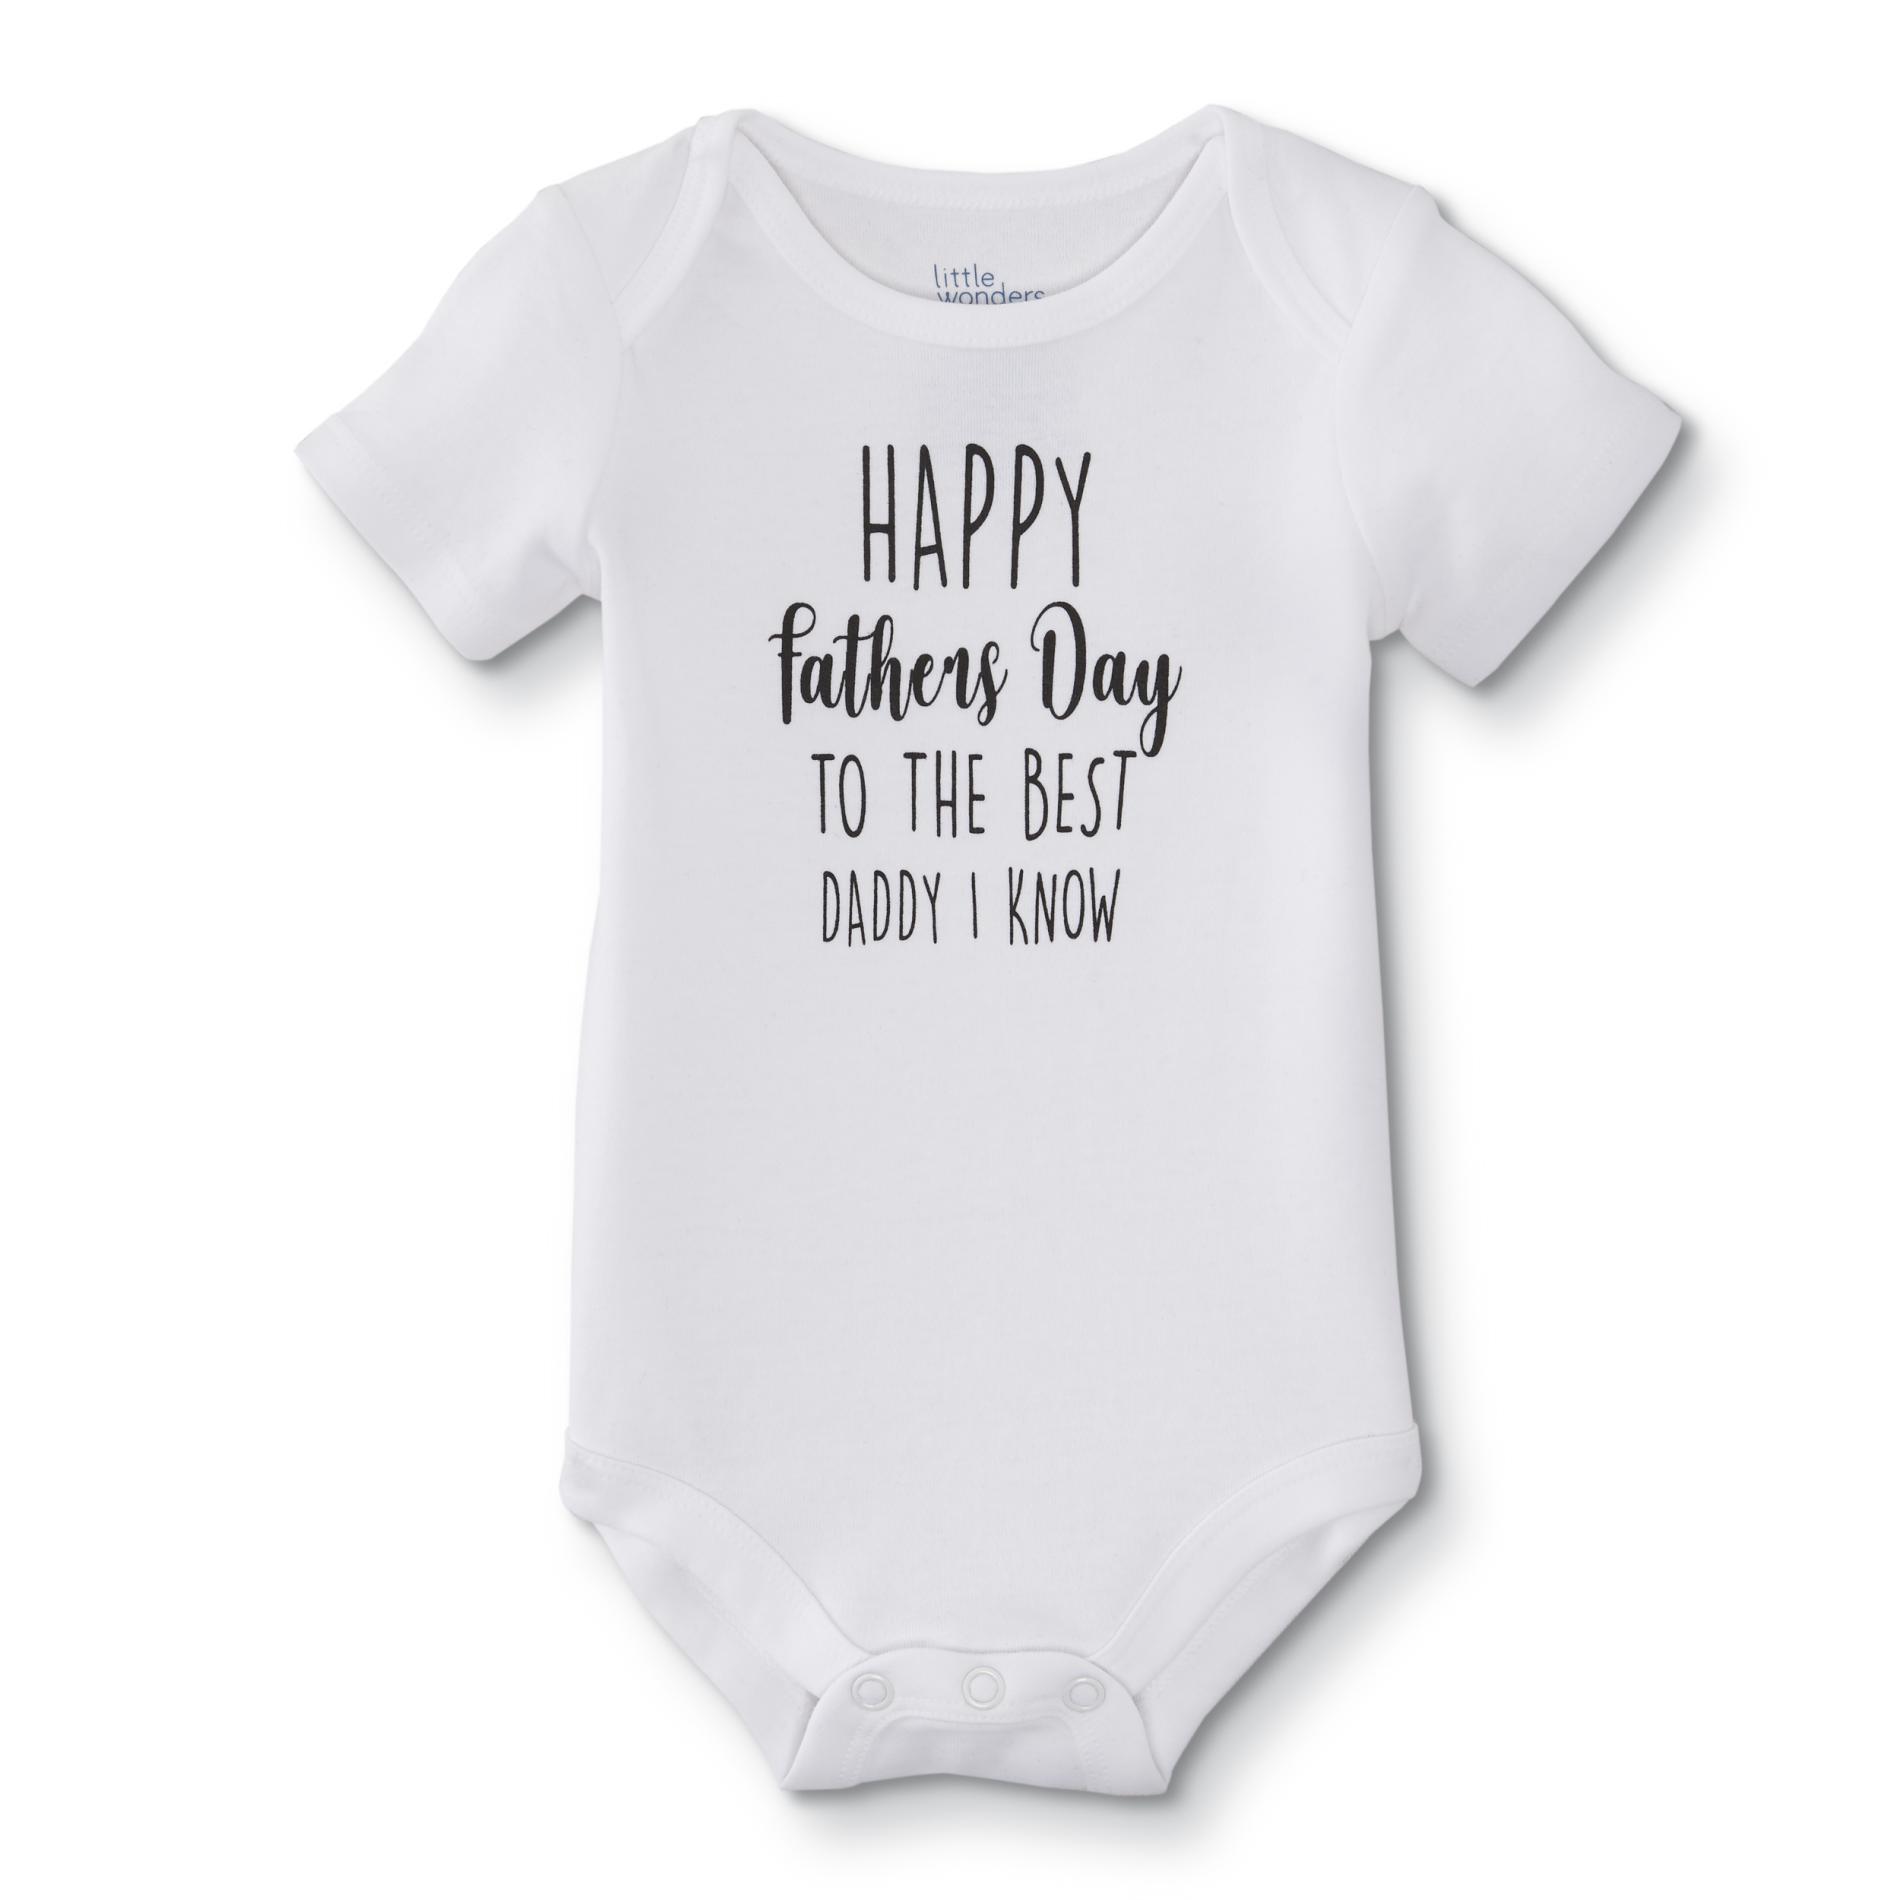 Little Wonders Infants' Graphic Bodysuit - Father's Day